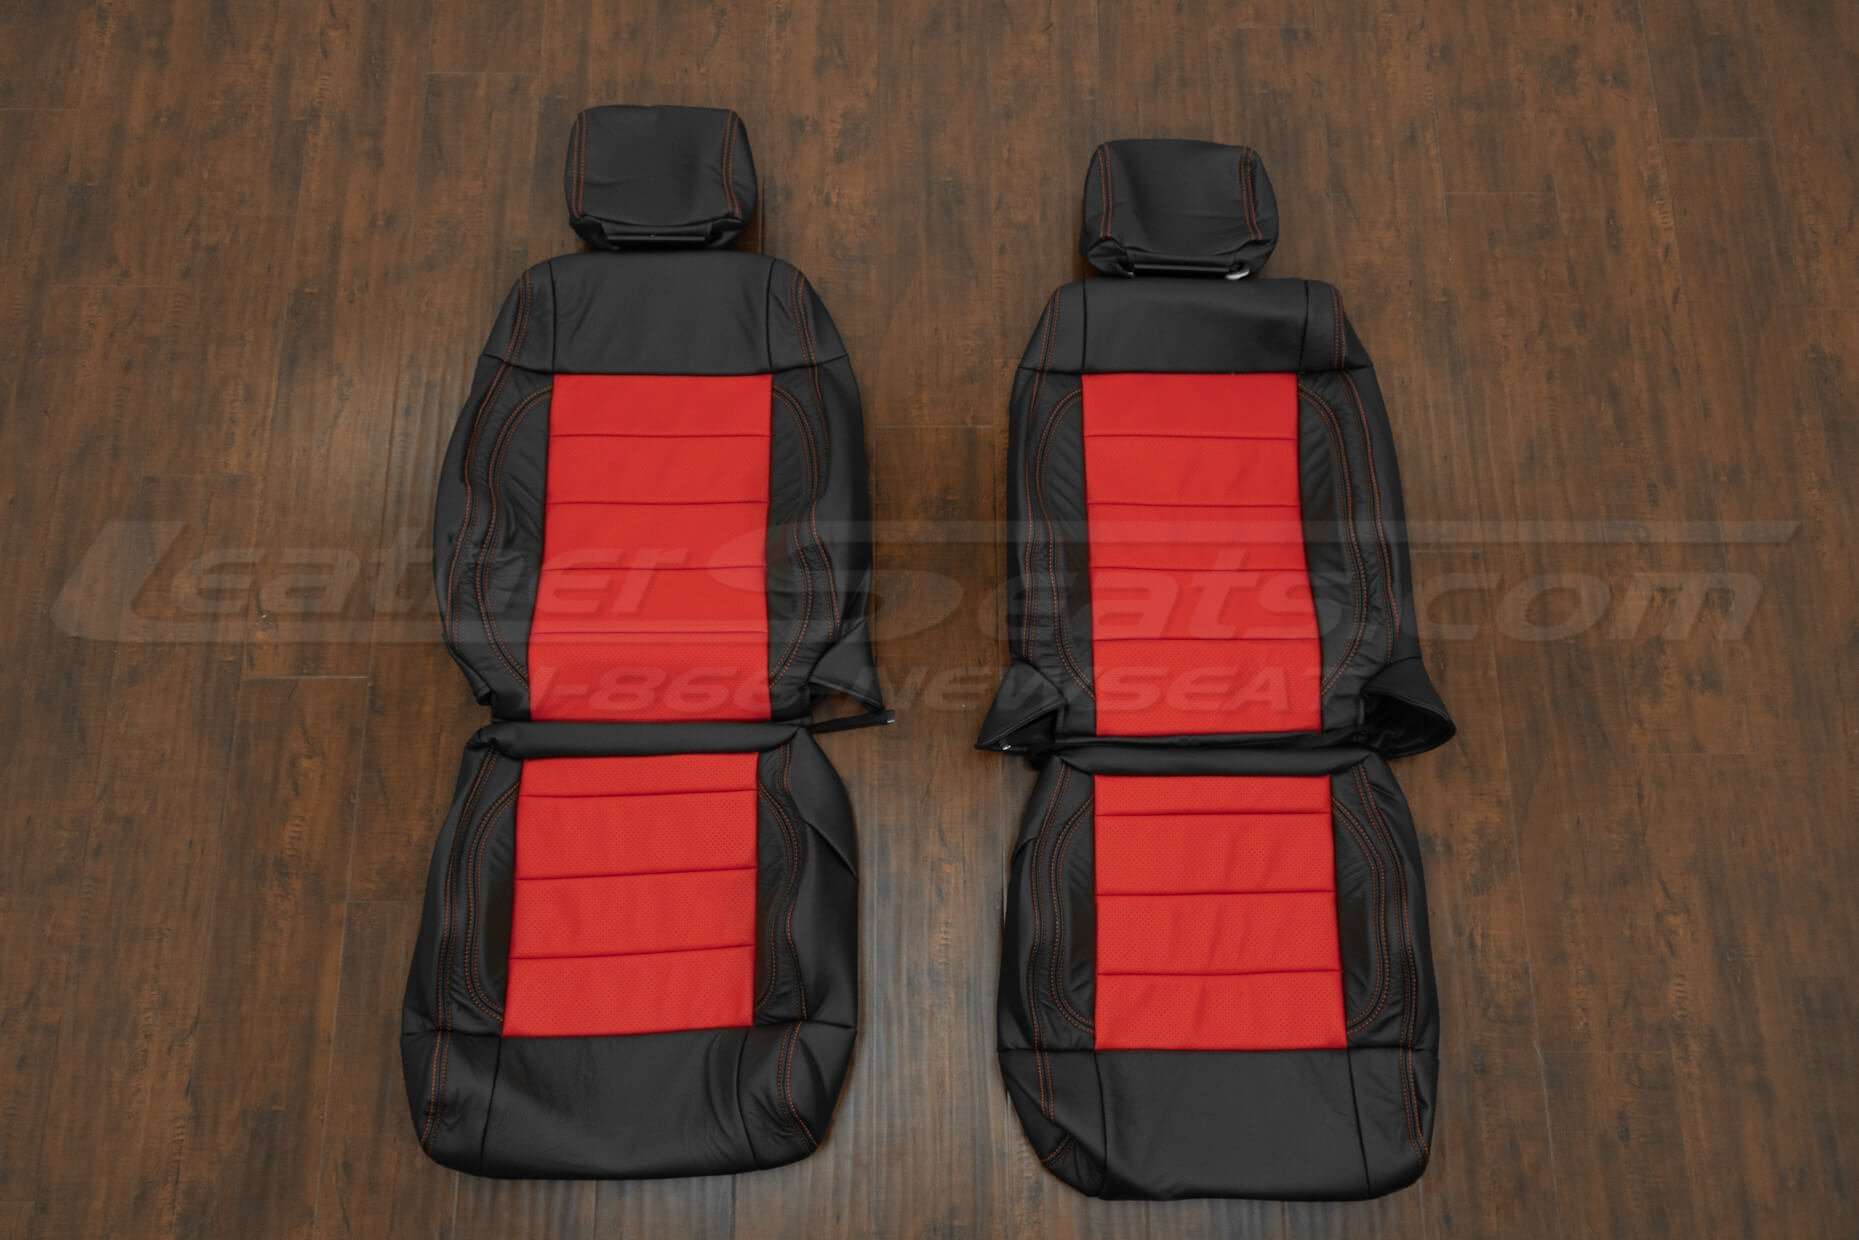 07-10 Jeep Wrangler Upholstery Kit - Black / Bright Red - Front seat upholstery